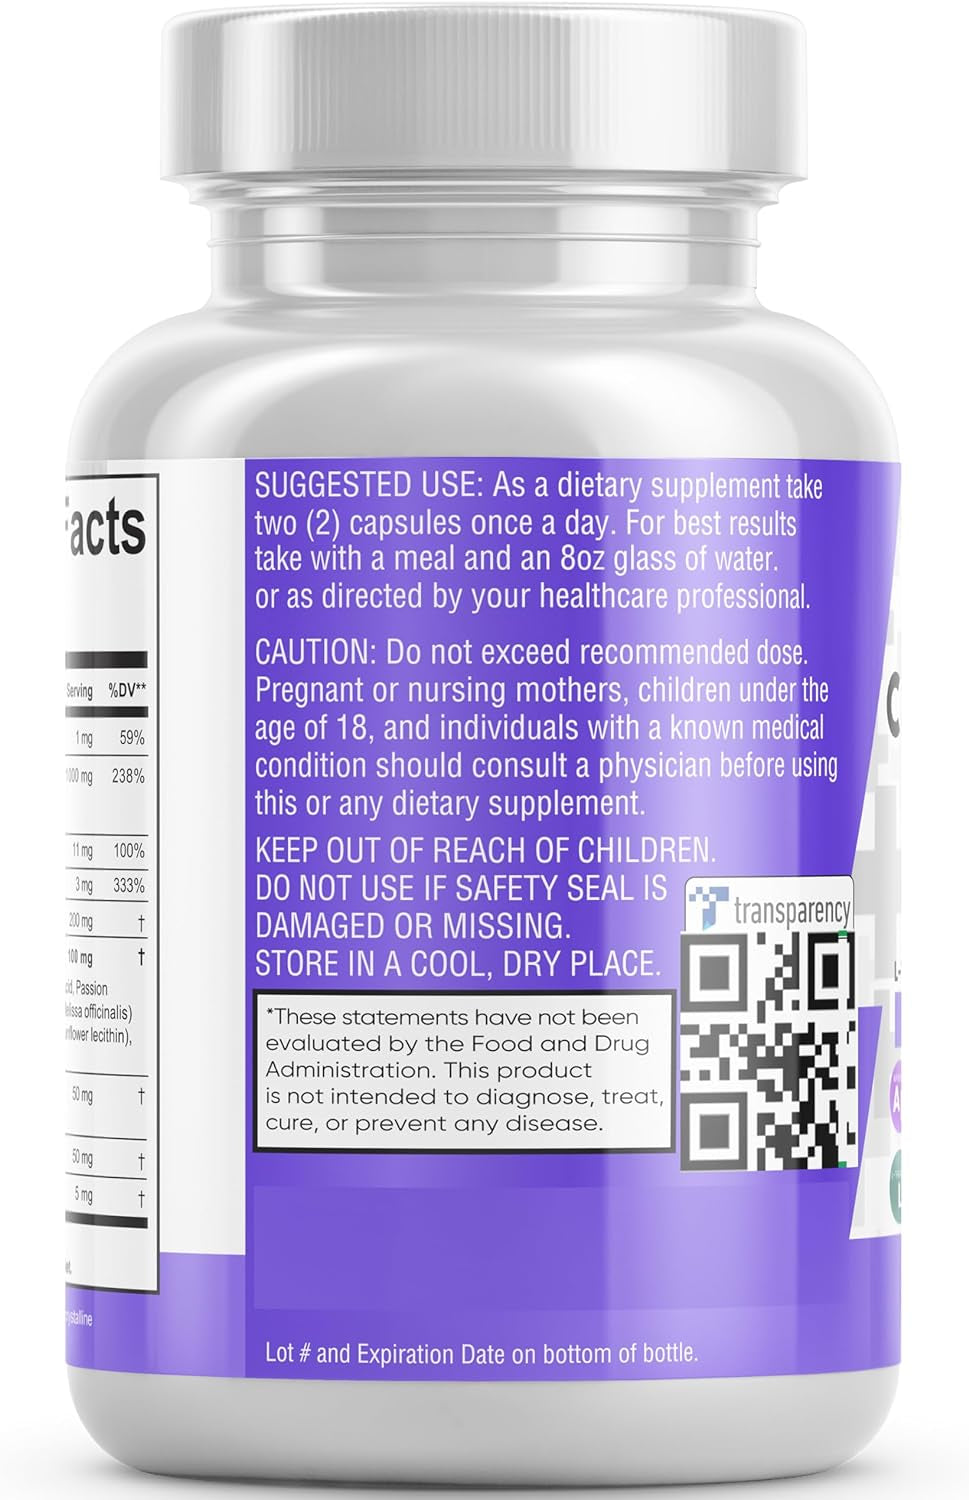 Magnesium Glycinate Complex 1000Mg with L-Theanine 200Mg Apigenin 50Mg Citrate Taurate Supplement - 5-HTP GABA Passion Flower Lemon Balm L-Glycine Phosphatidylserine Ashwagandha - 60 Count